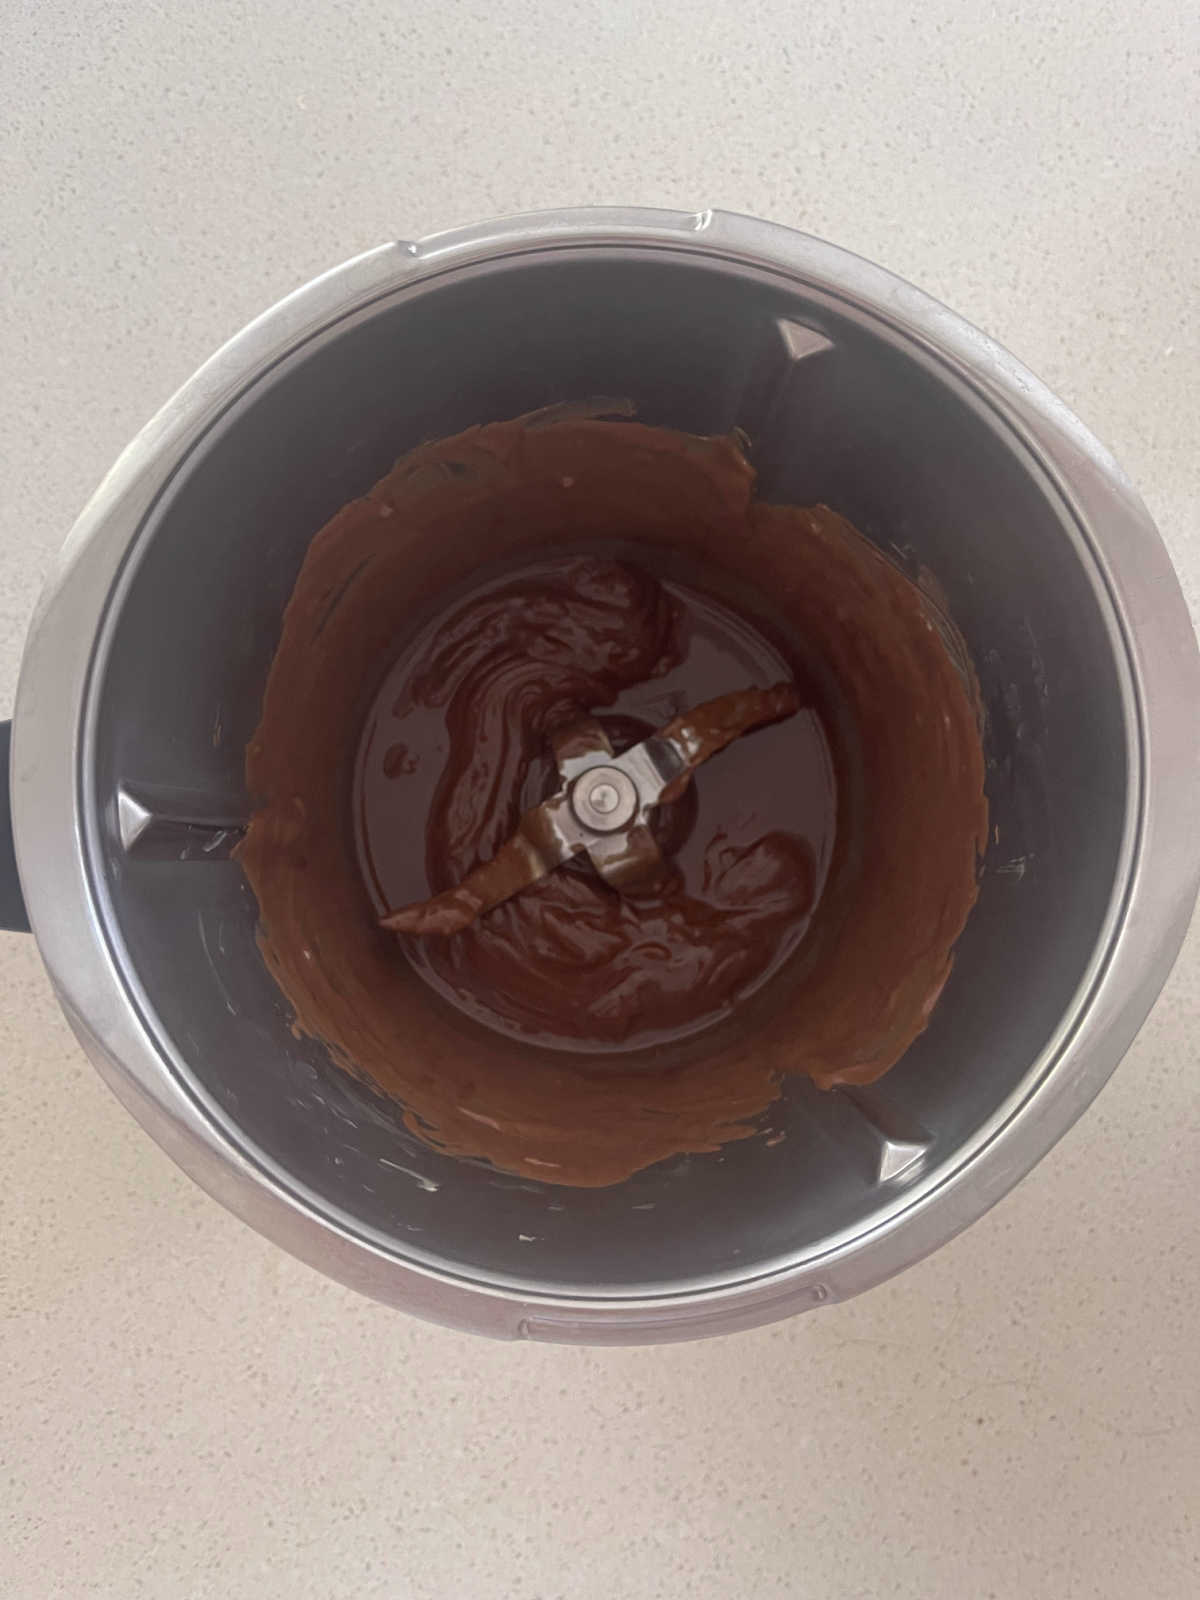 Melted Caramello Chocolate and butter in a Thermomix bowl.